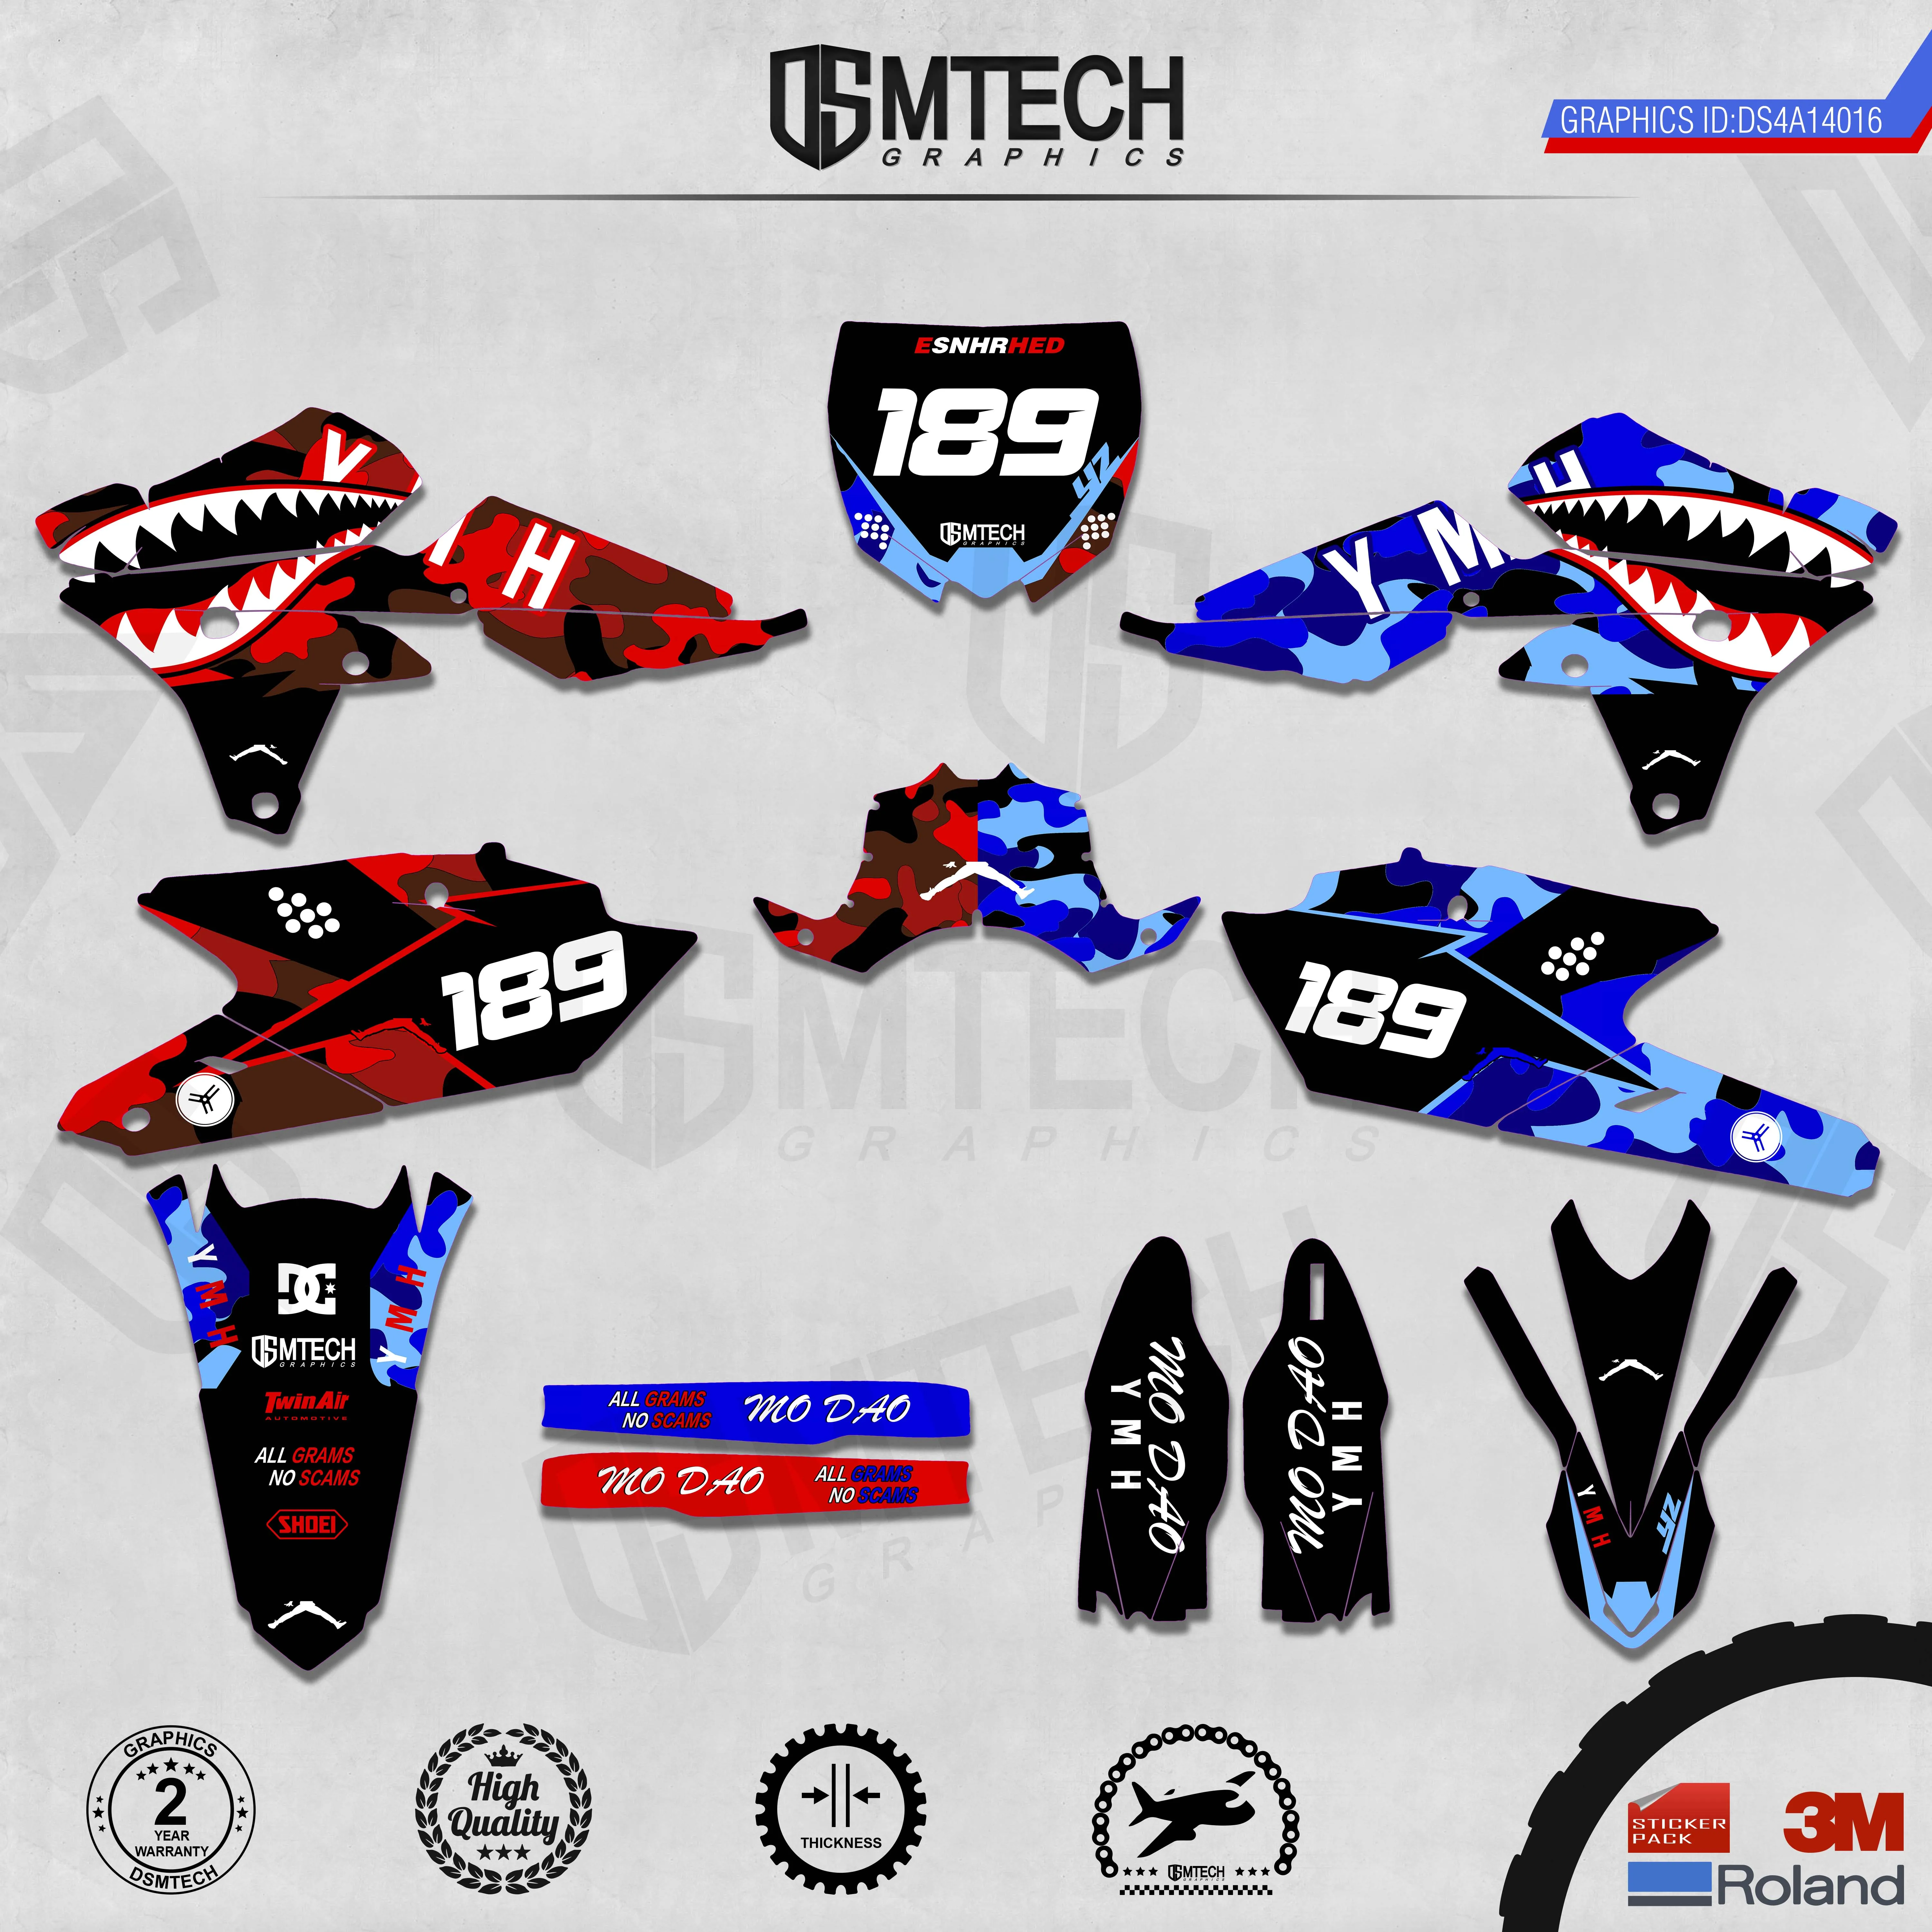 DSMTECH Customized Team Graphics Backgrounds Decals 3M Custom Stickers For 14-18 YZ250F 15-19 YZ250FX WRF250 14-17 YZ450F 016